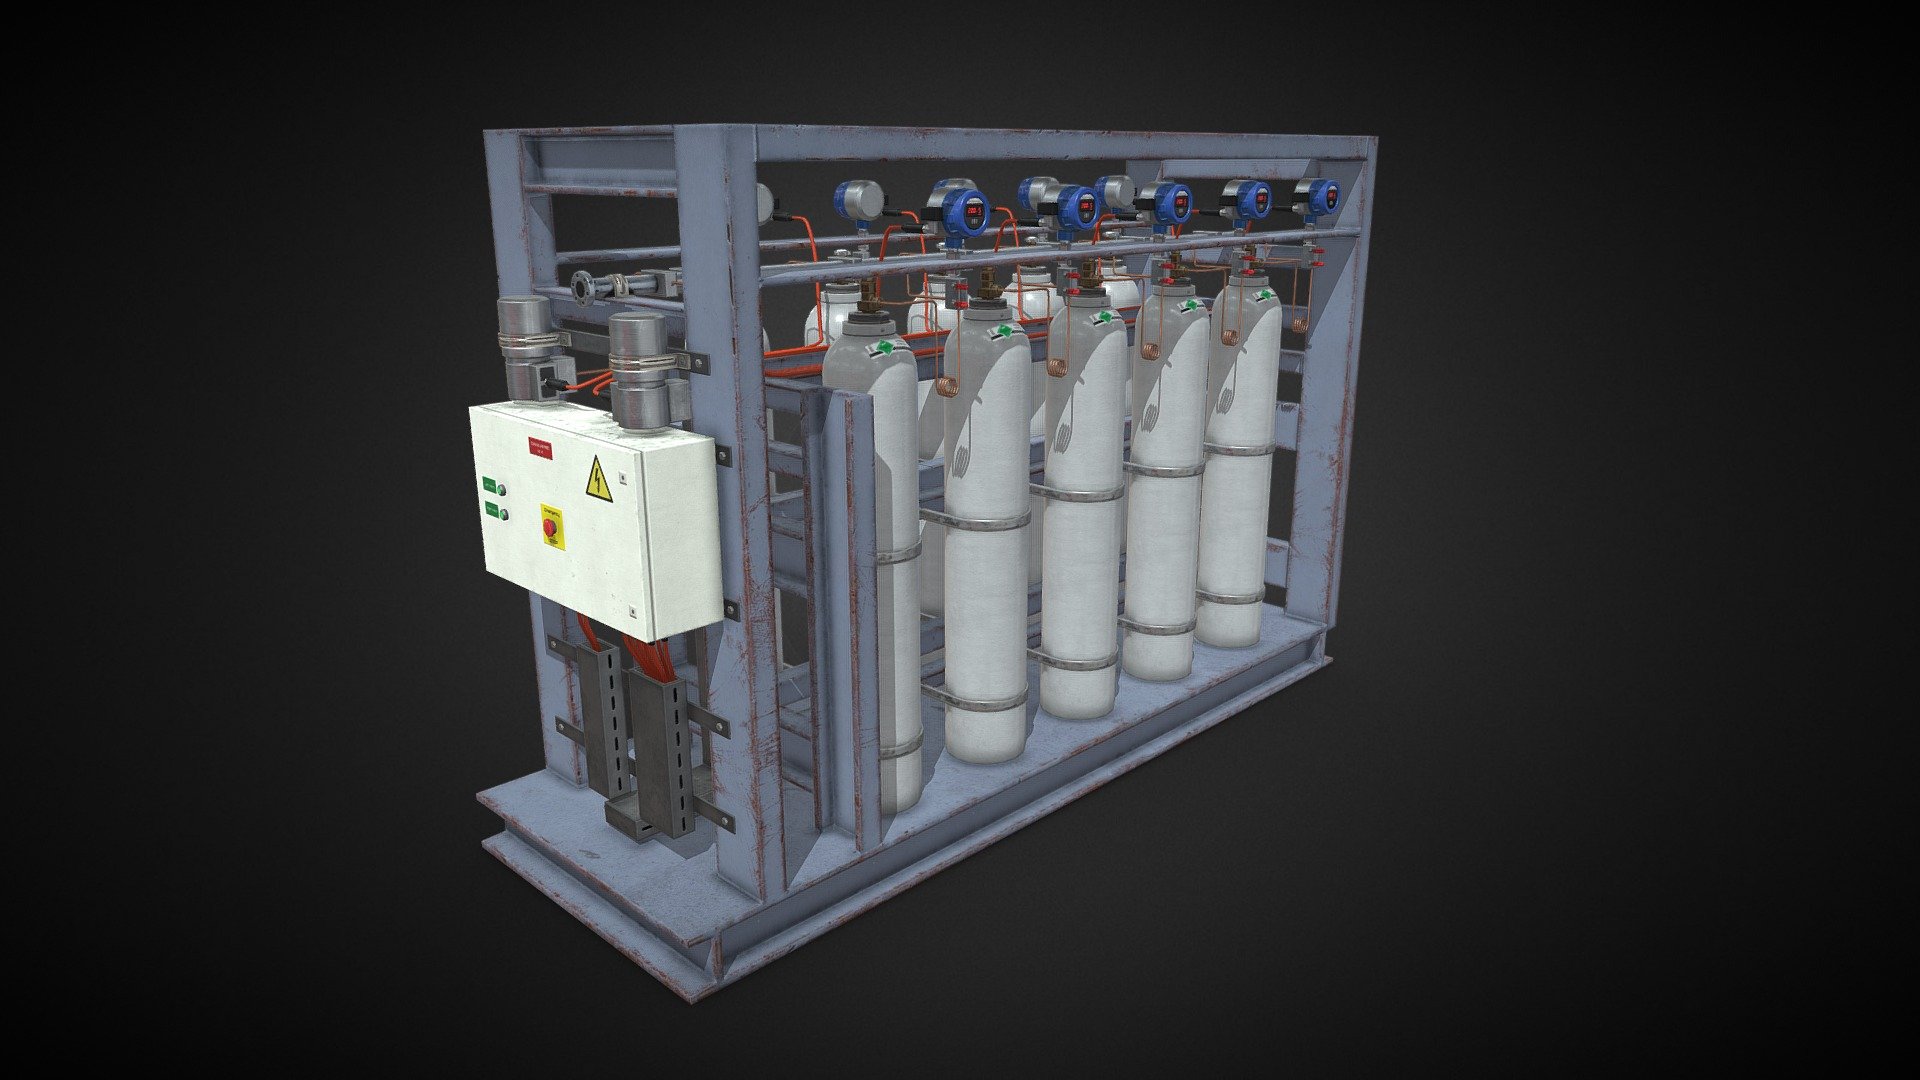 Highly detailed model of a storage rack for 10 nitrogen gas cylinders. Suitable for industrial visualization, simulation, and games.

Technical Features:




PBR Textures: base color, roughness, metallic, emissive, and normal map

Polys: 18,558 (36,852 tris)

Real-world scale based on references

All branding and labels are custom made

Formats included: .blend / .fbx / .obj

Textures:




Number of textures: 18

Texture format: PNG

Texture size: 4096 x 4096

The model can be used in any game, personal project, ArchViz, etc. It may not be reselled or redistributed 3d model